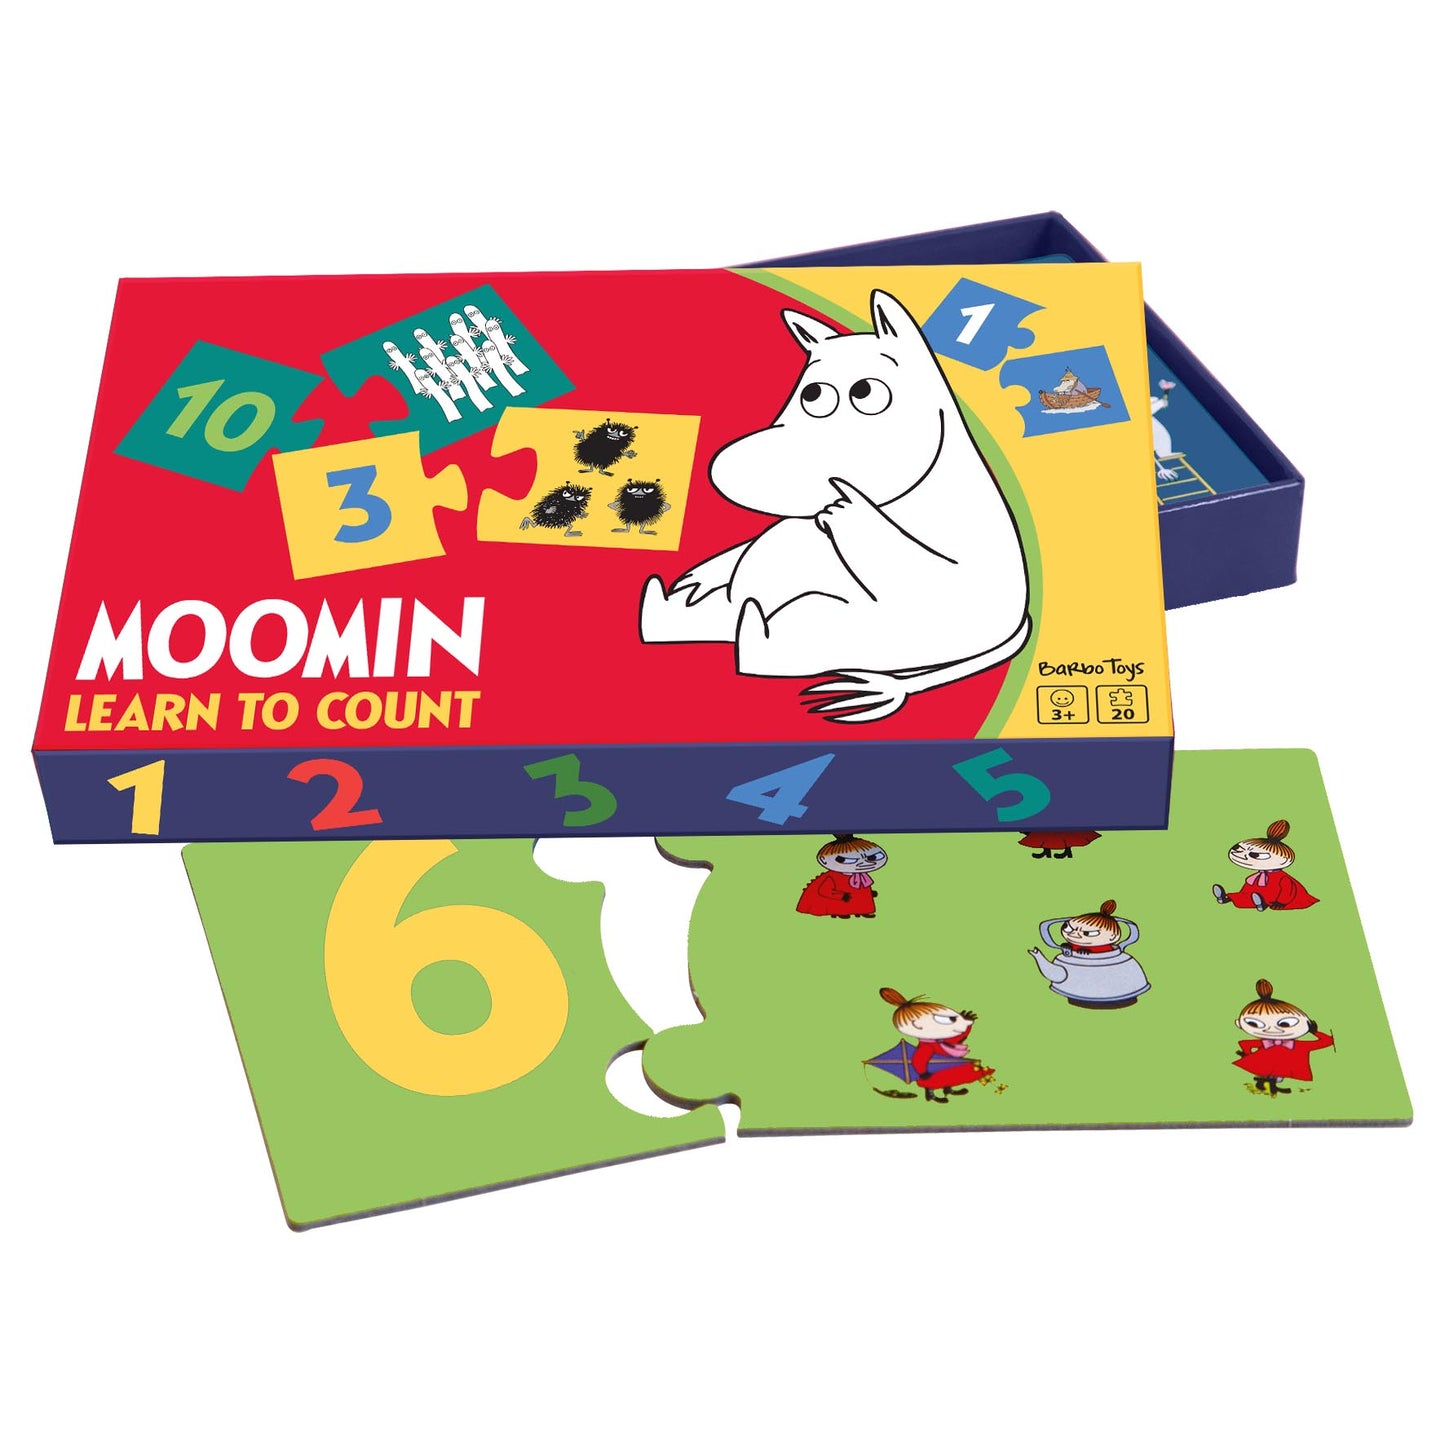 Moomin - Learn to Count